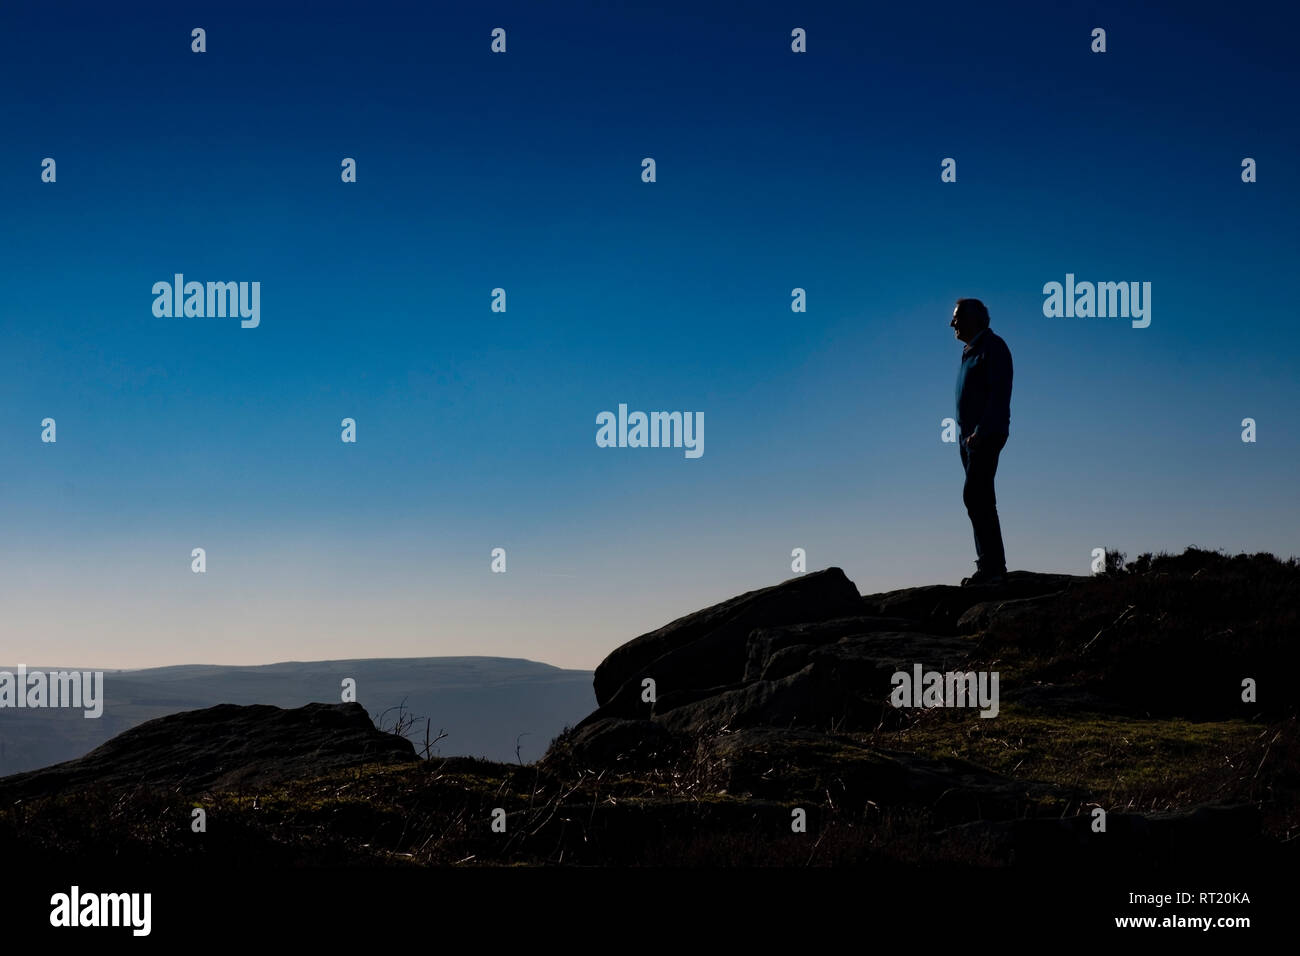 Senior man standing on cliff edge, 60s age group, silhouette against clear sky Stock Photo